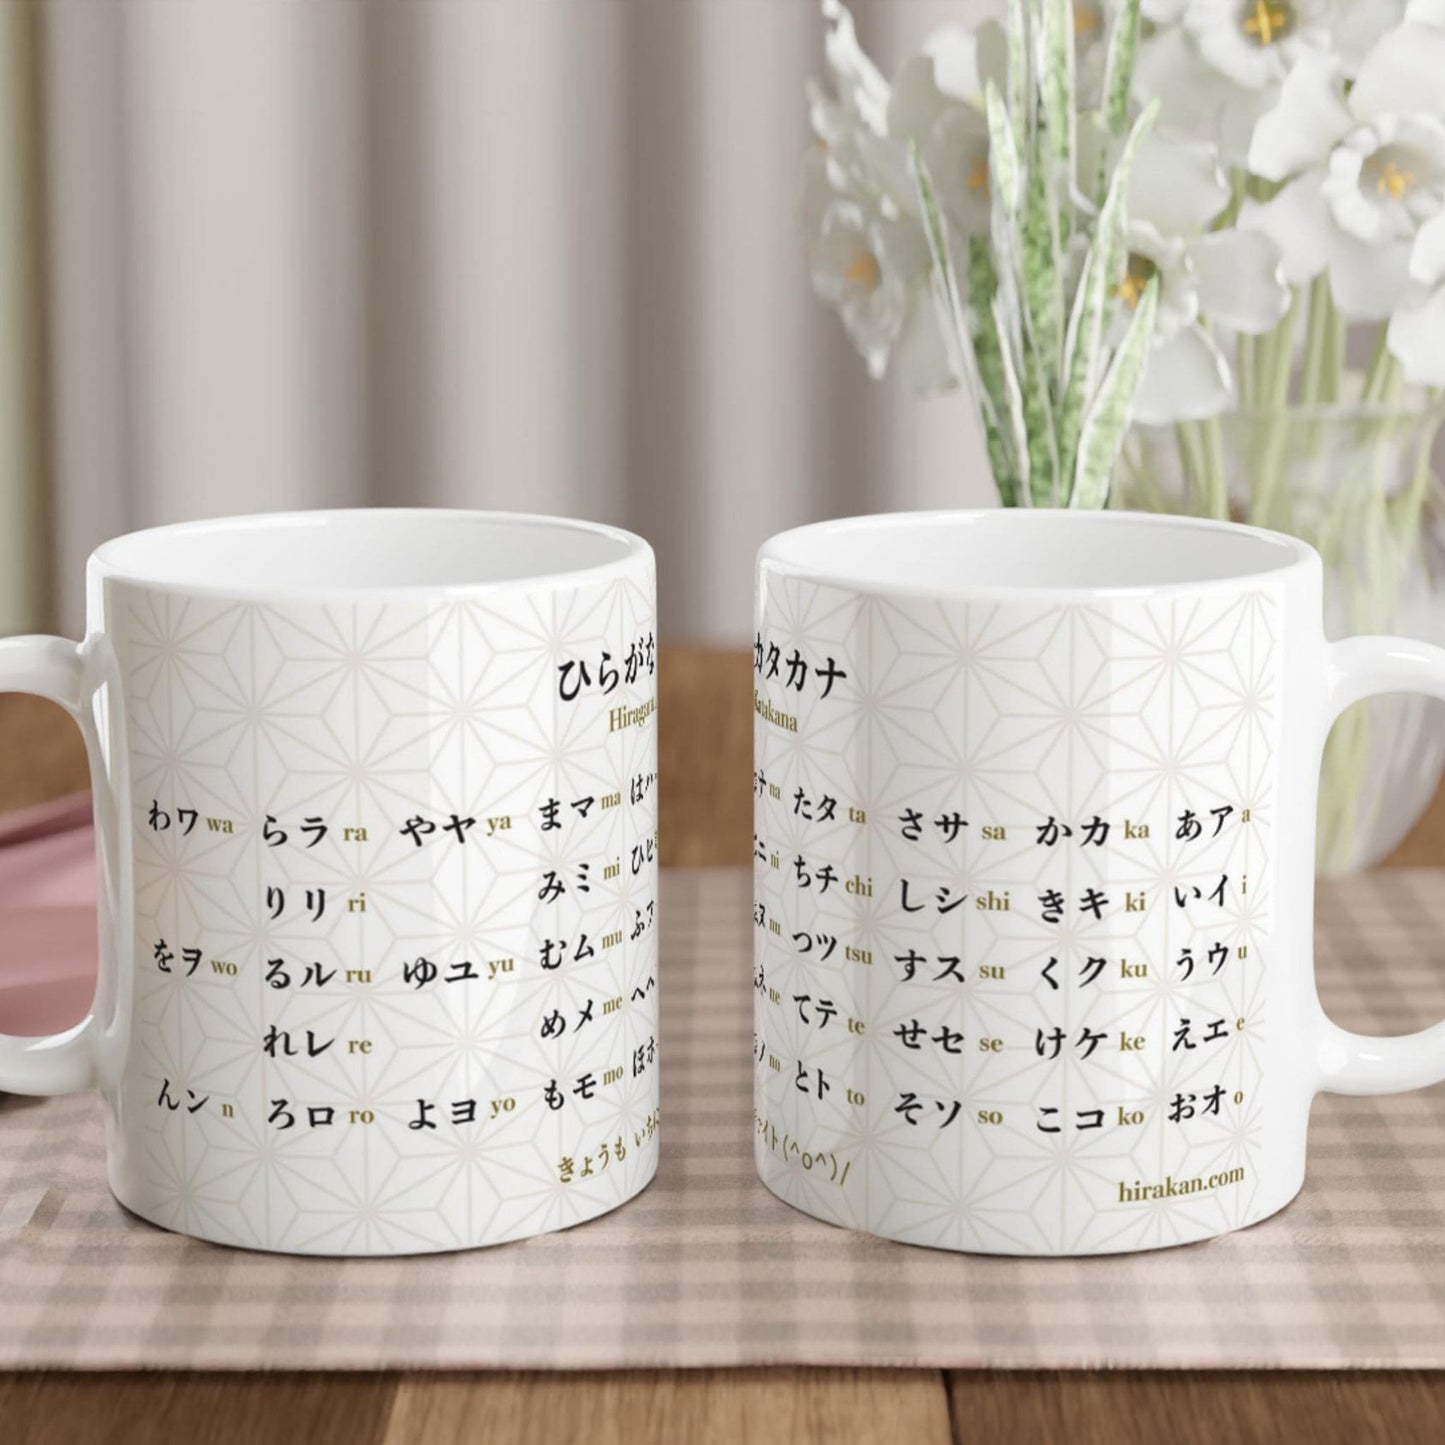 2 mugs with hiragana and katakana chart print to learn Japanese language facing each other on a table